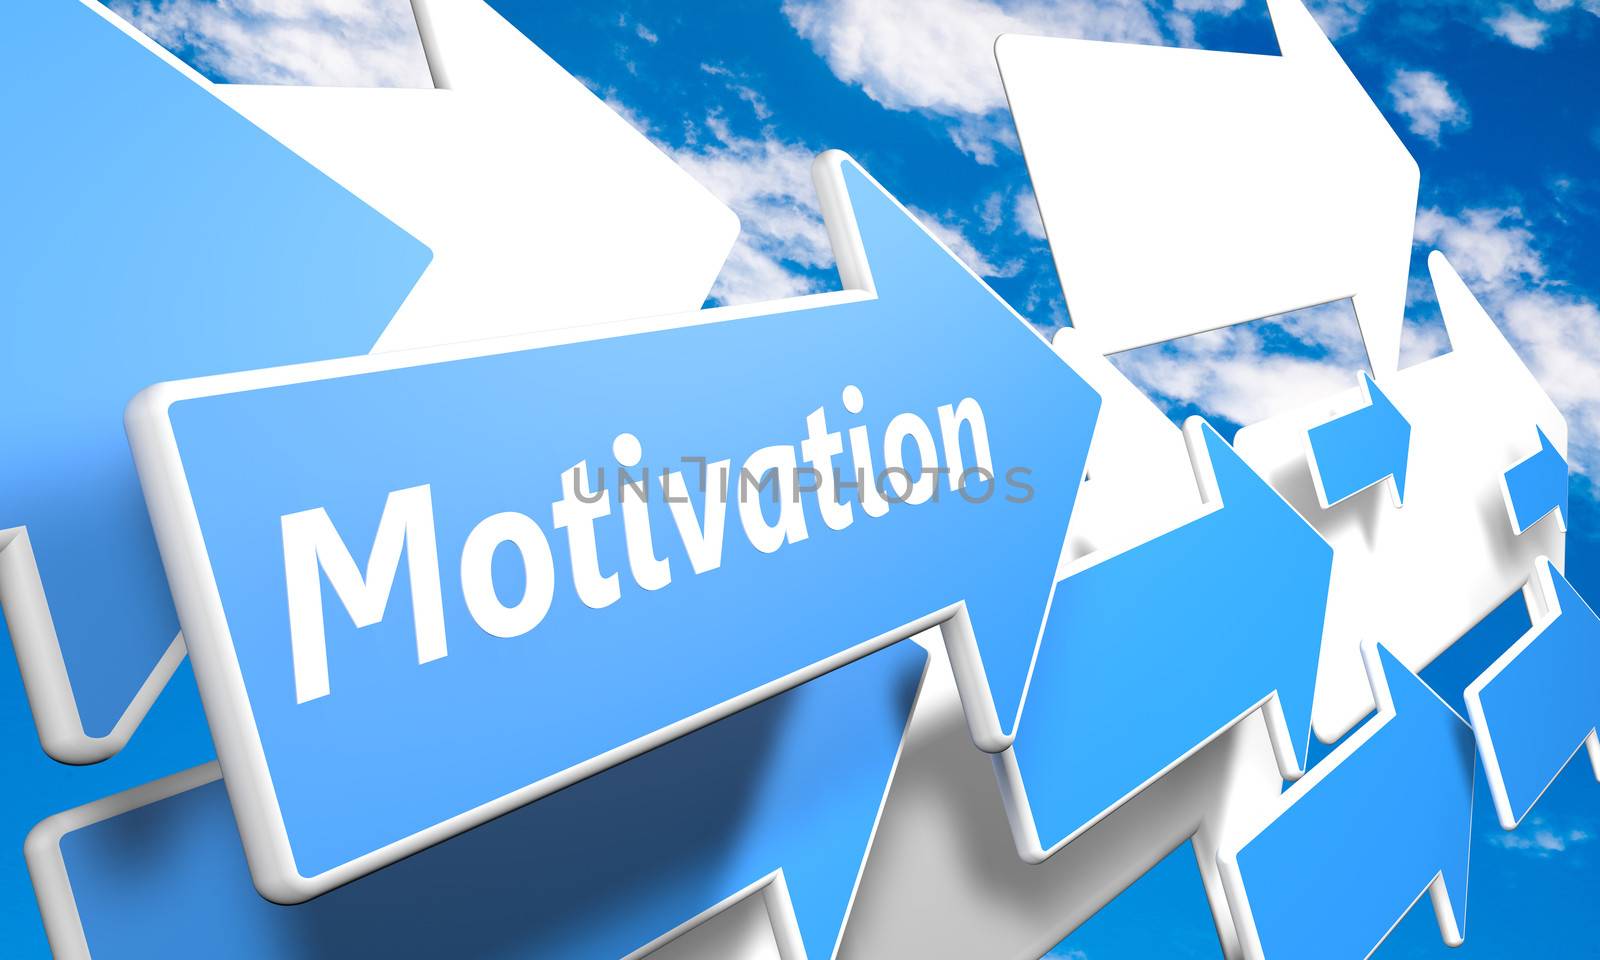 Motivation 3d render concept with blue and white arrows flying in a blue sky with clouds